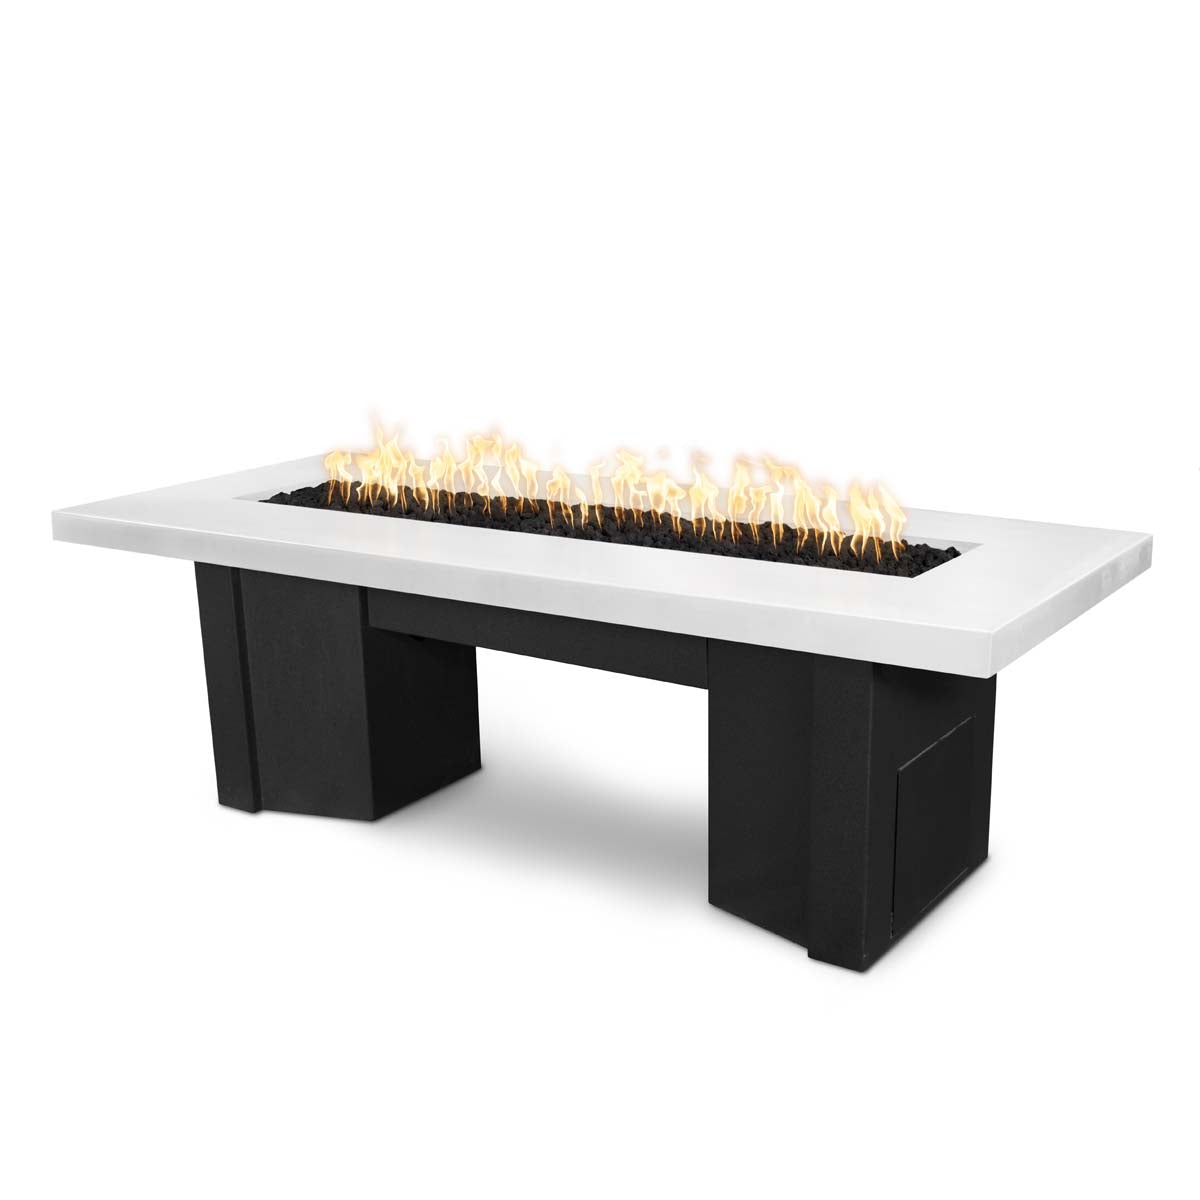 The Outdoor Plus Rectangular Alameda 30" Black & White Powder Coated Liquid Propane Fire Pit with 110V Electronic Ignition